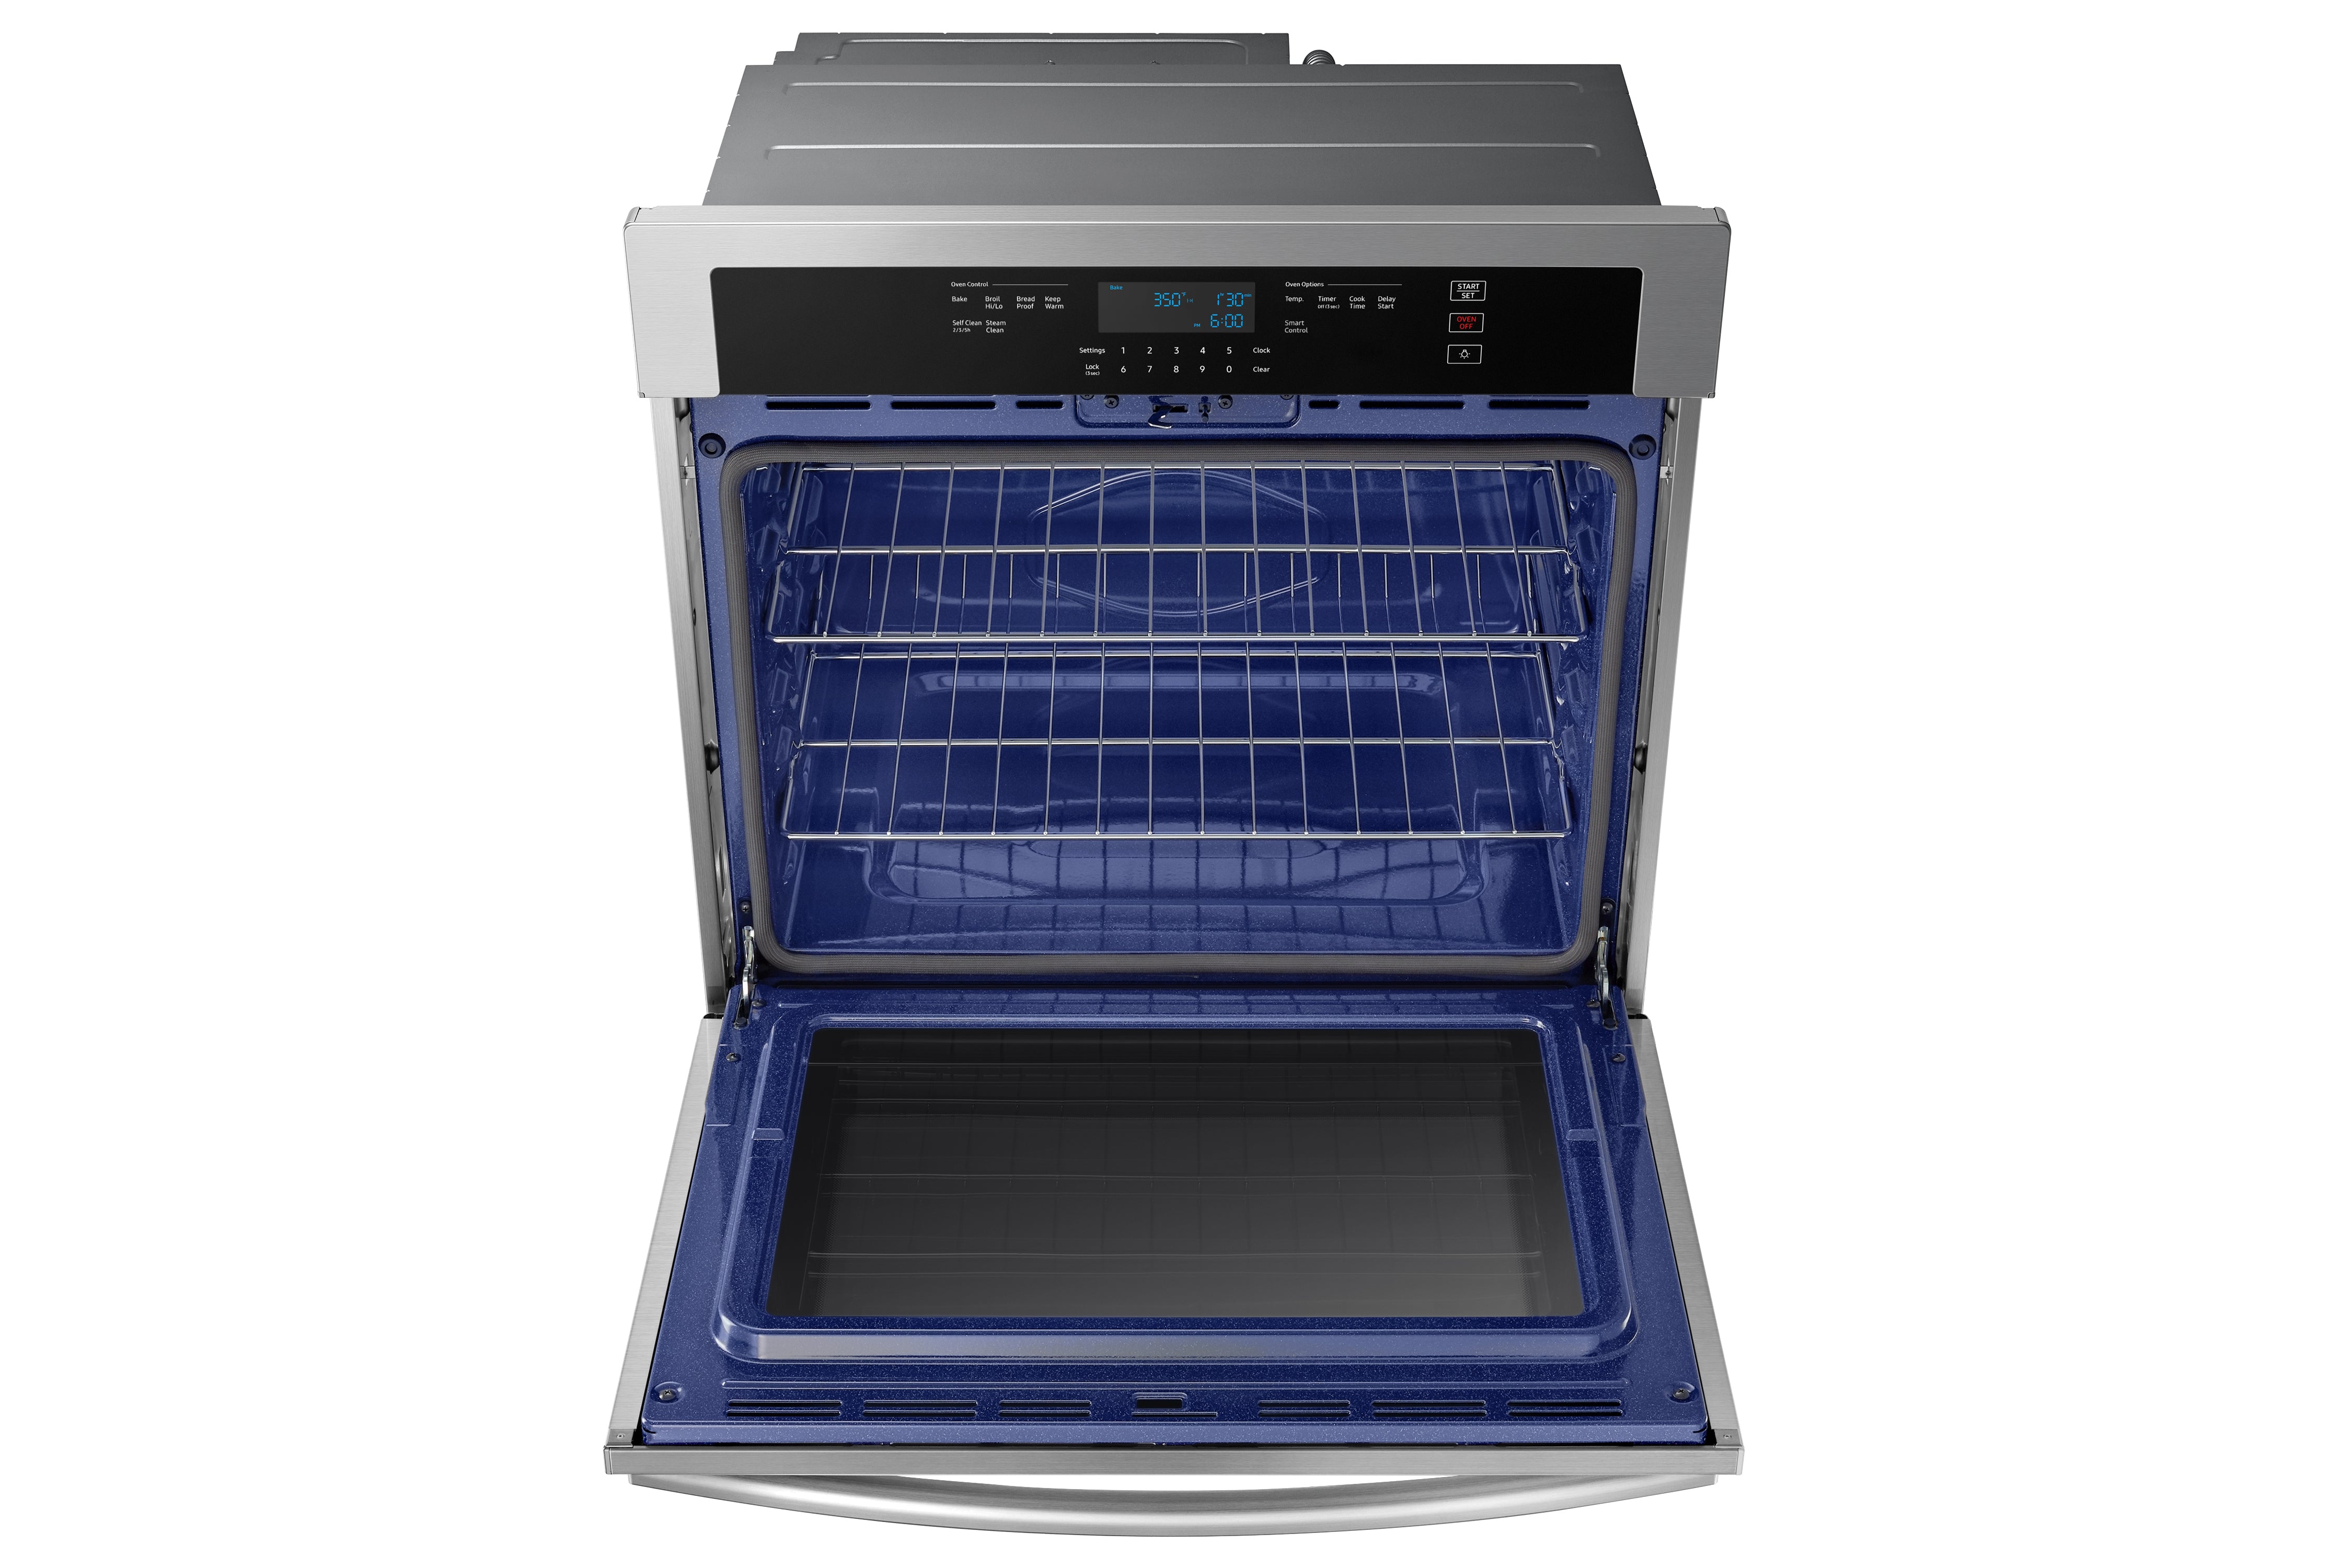 Samsung - 5.1 cu. ft Single Wall Oven in Stainless - NV51T5512SS